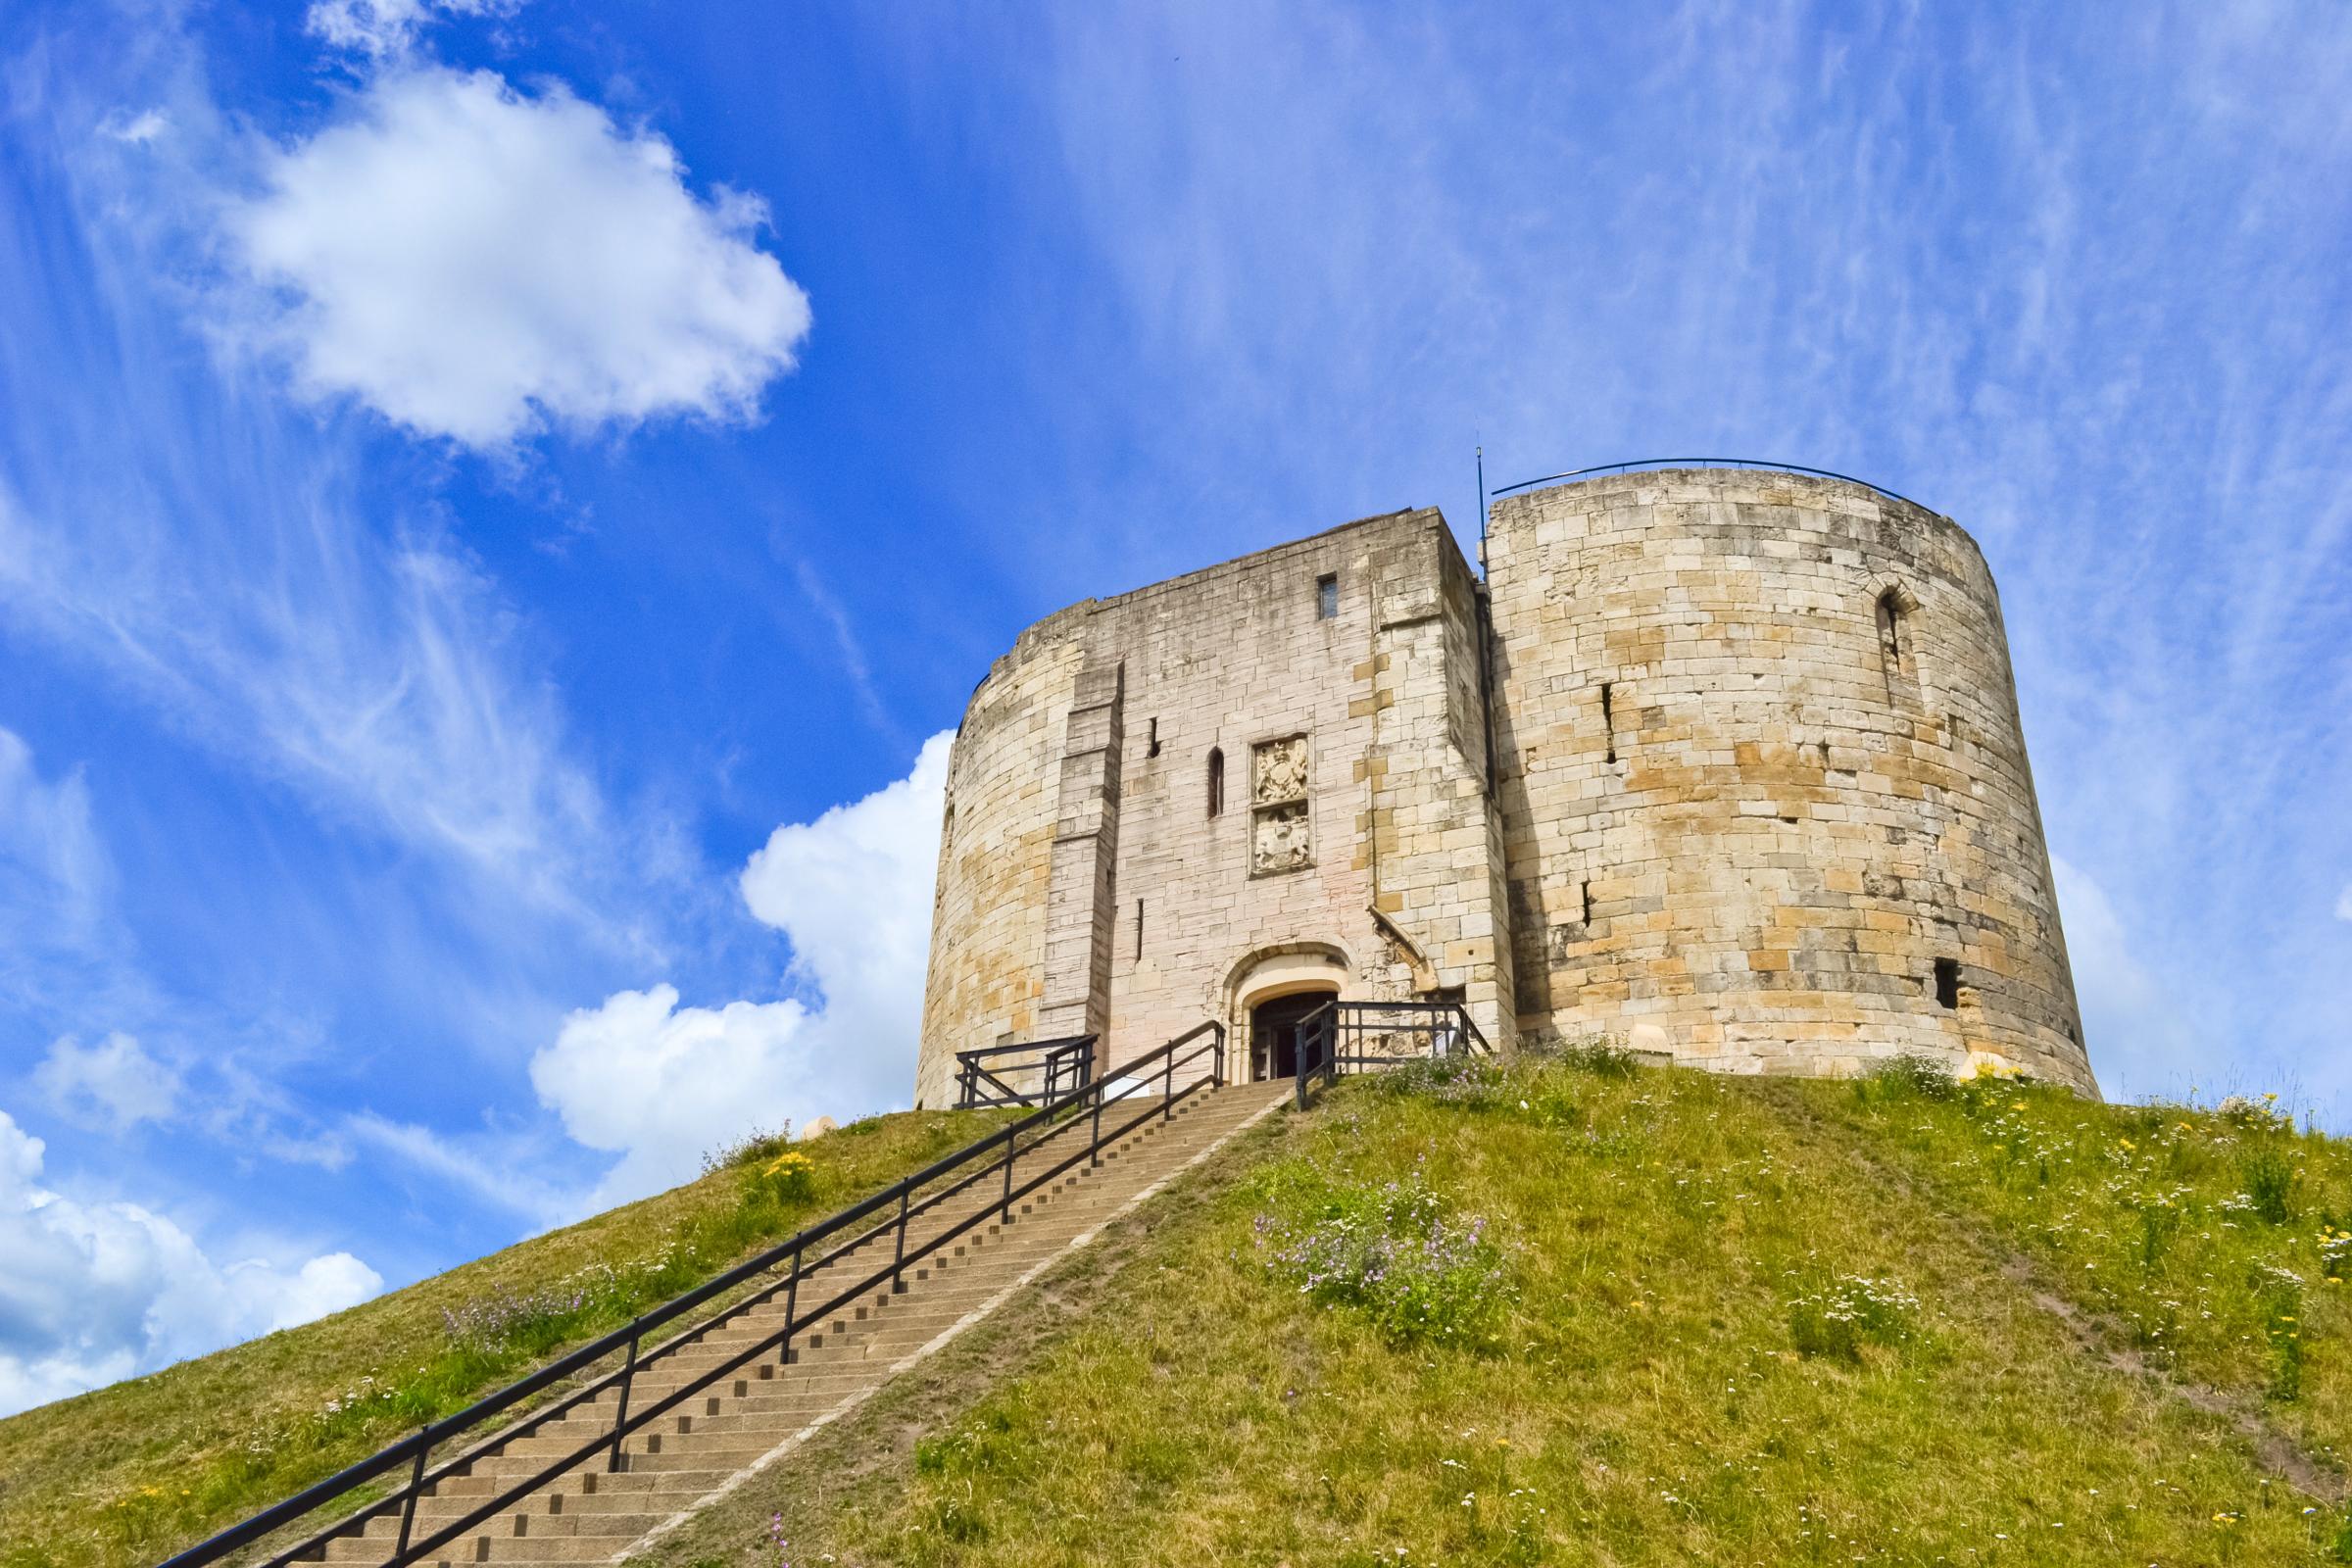 Cliffords Tower is named after Roger de Clifford who was executed there after being captured on Boroughbridge bridge